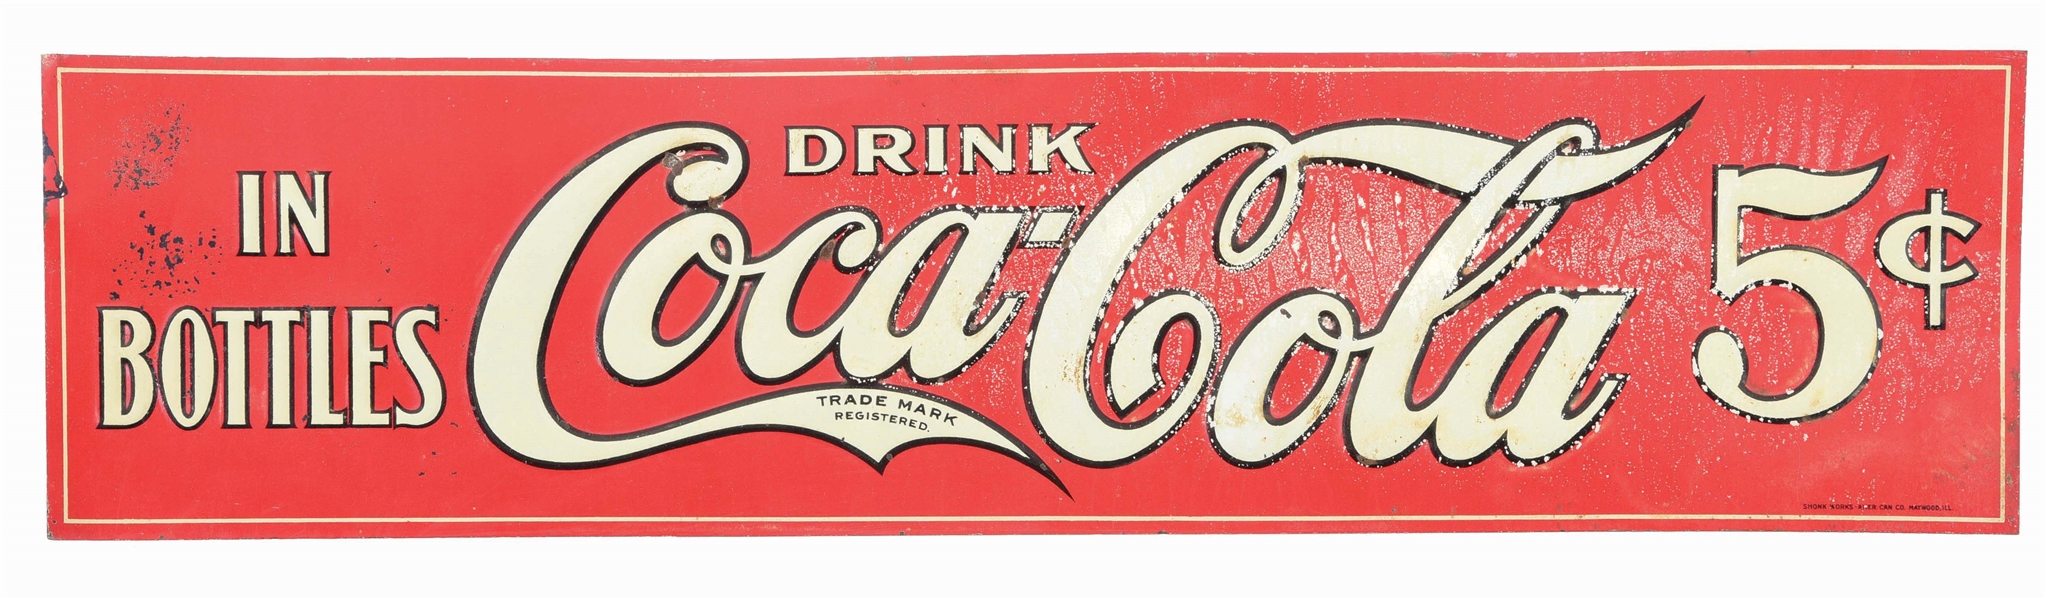 SINGLE SIDED EMBOSSED TIN DRINK A COCA-COLA 5¢ IN BOTTLES SIGN.